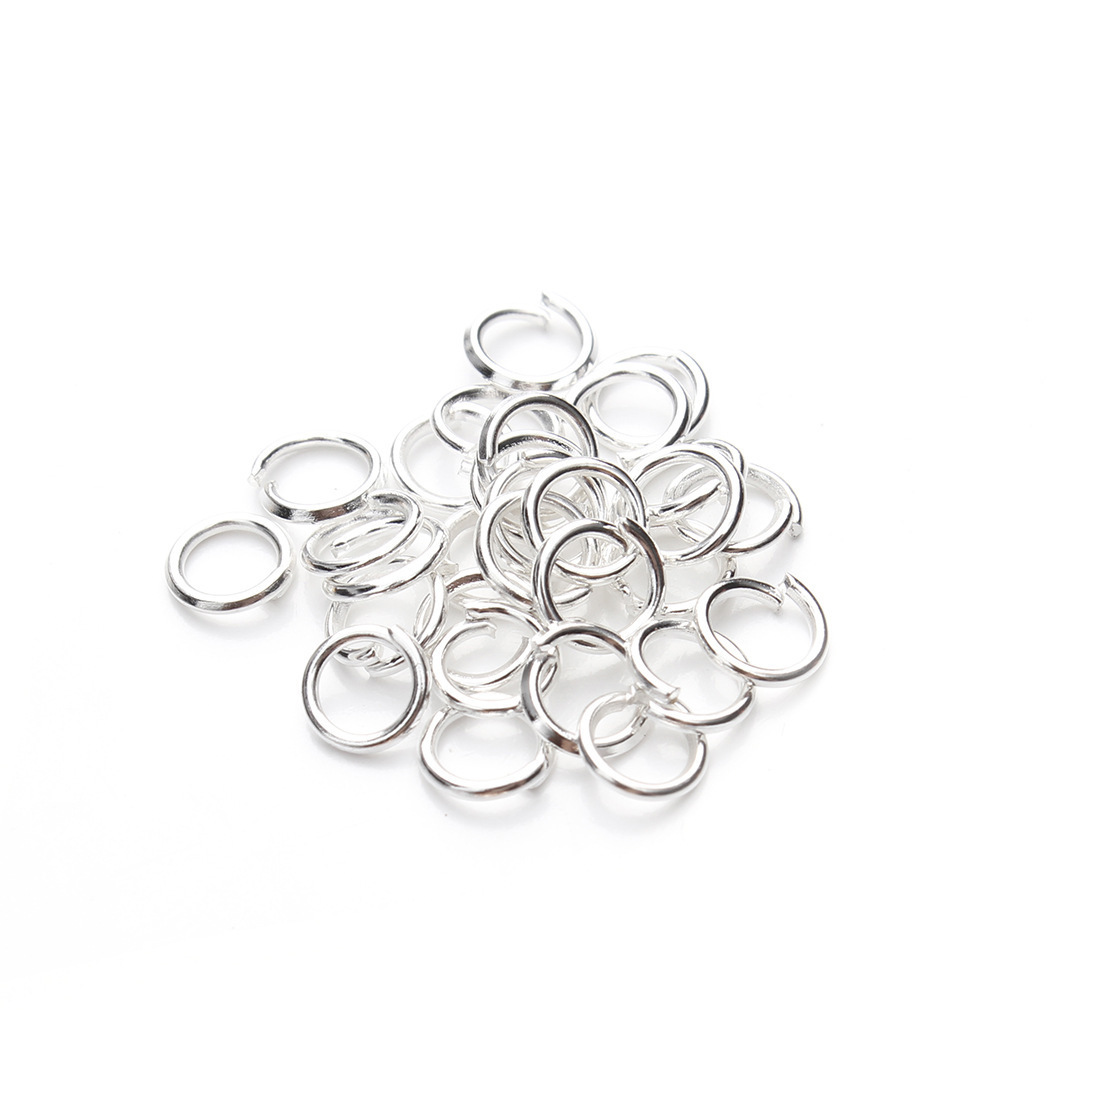 Silver outer diameter 9mm